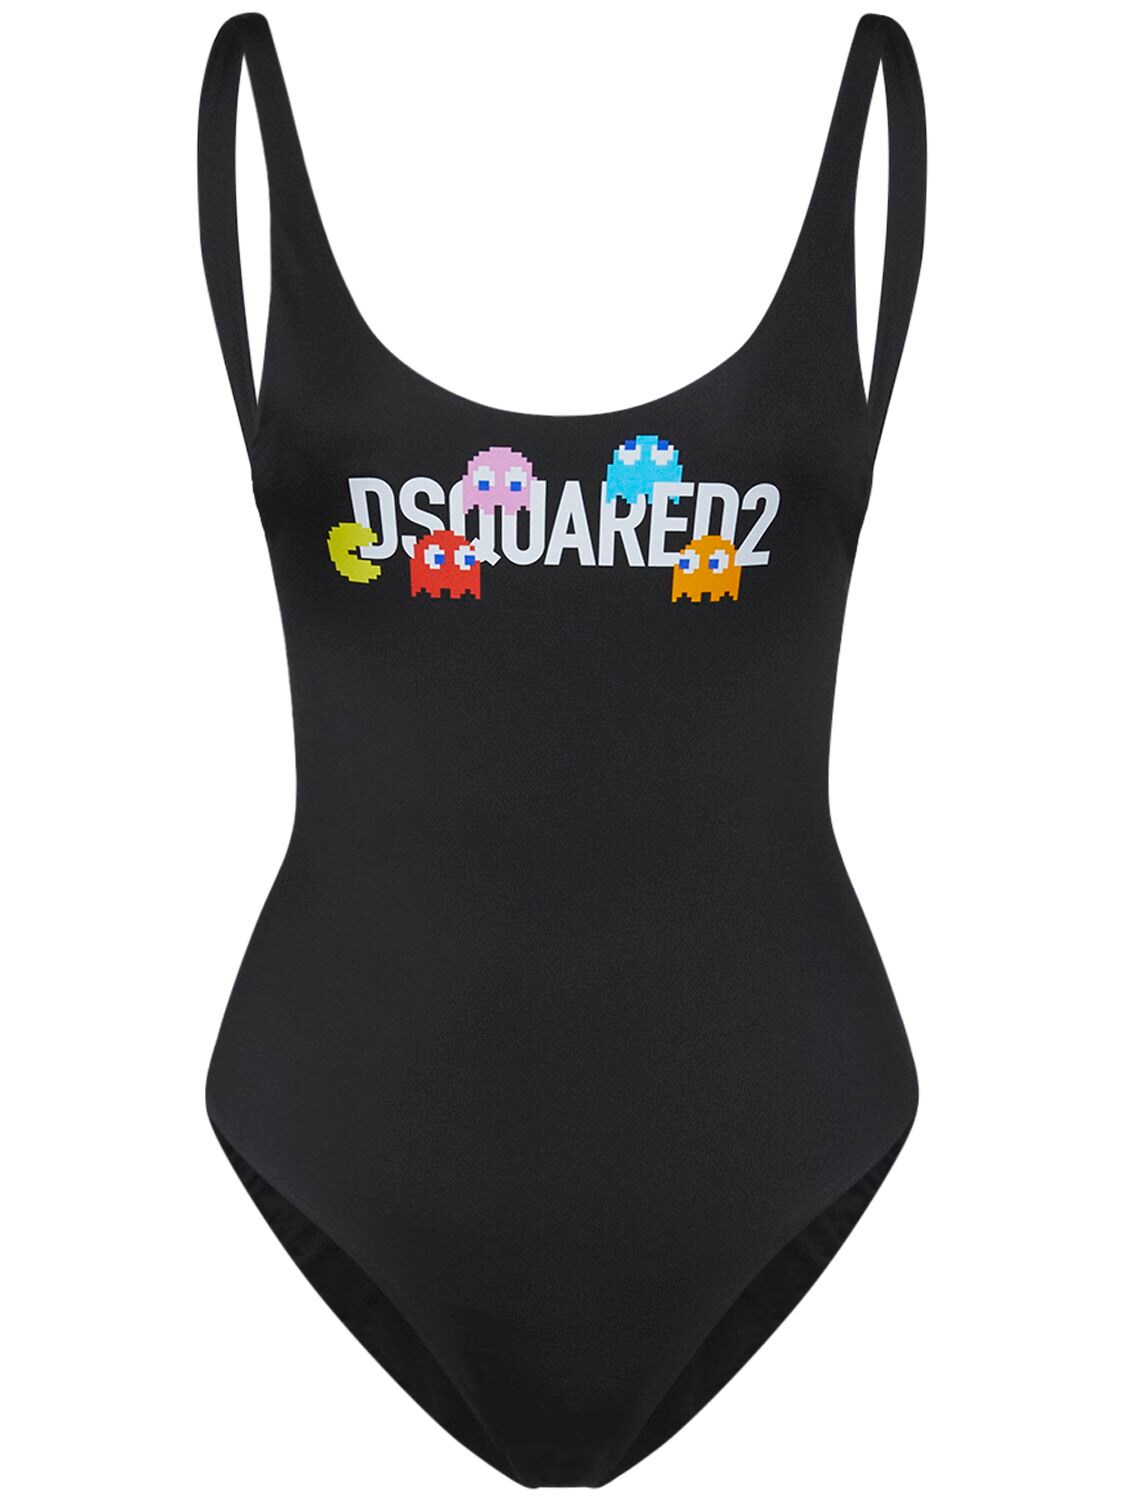 DSQUARED2 PAC-MAN LOGO PRINT ONE PIECE SWIMSUIT